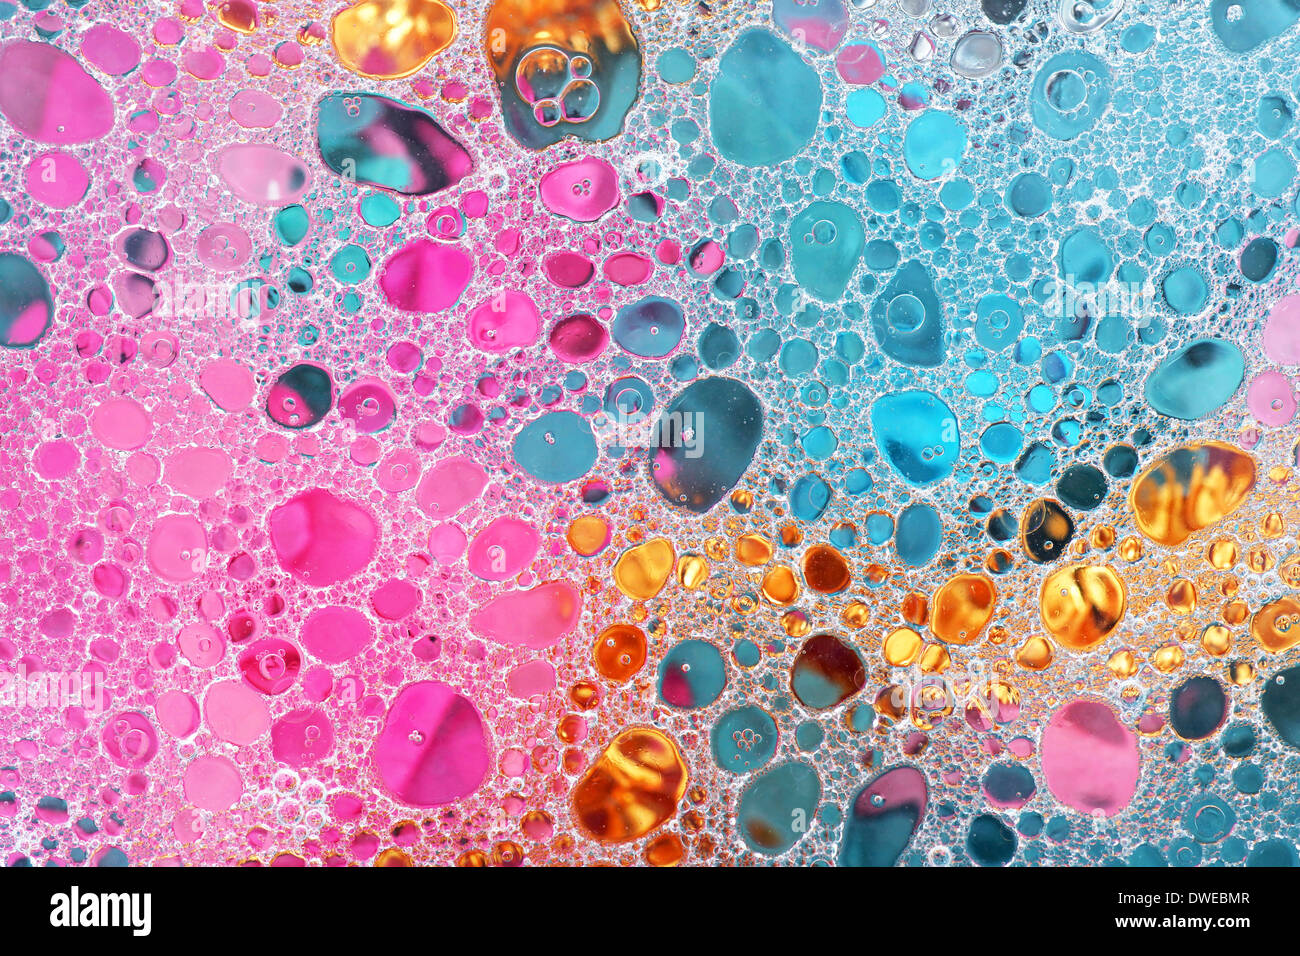 Abstract oil and water bubbles over colorful background, pink, gold and blue Stock Photo